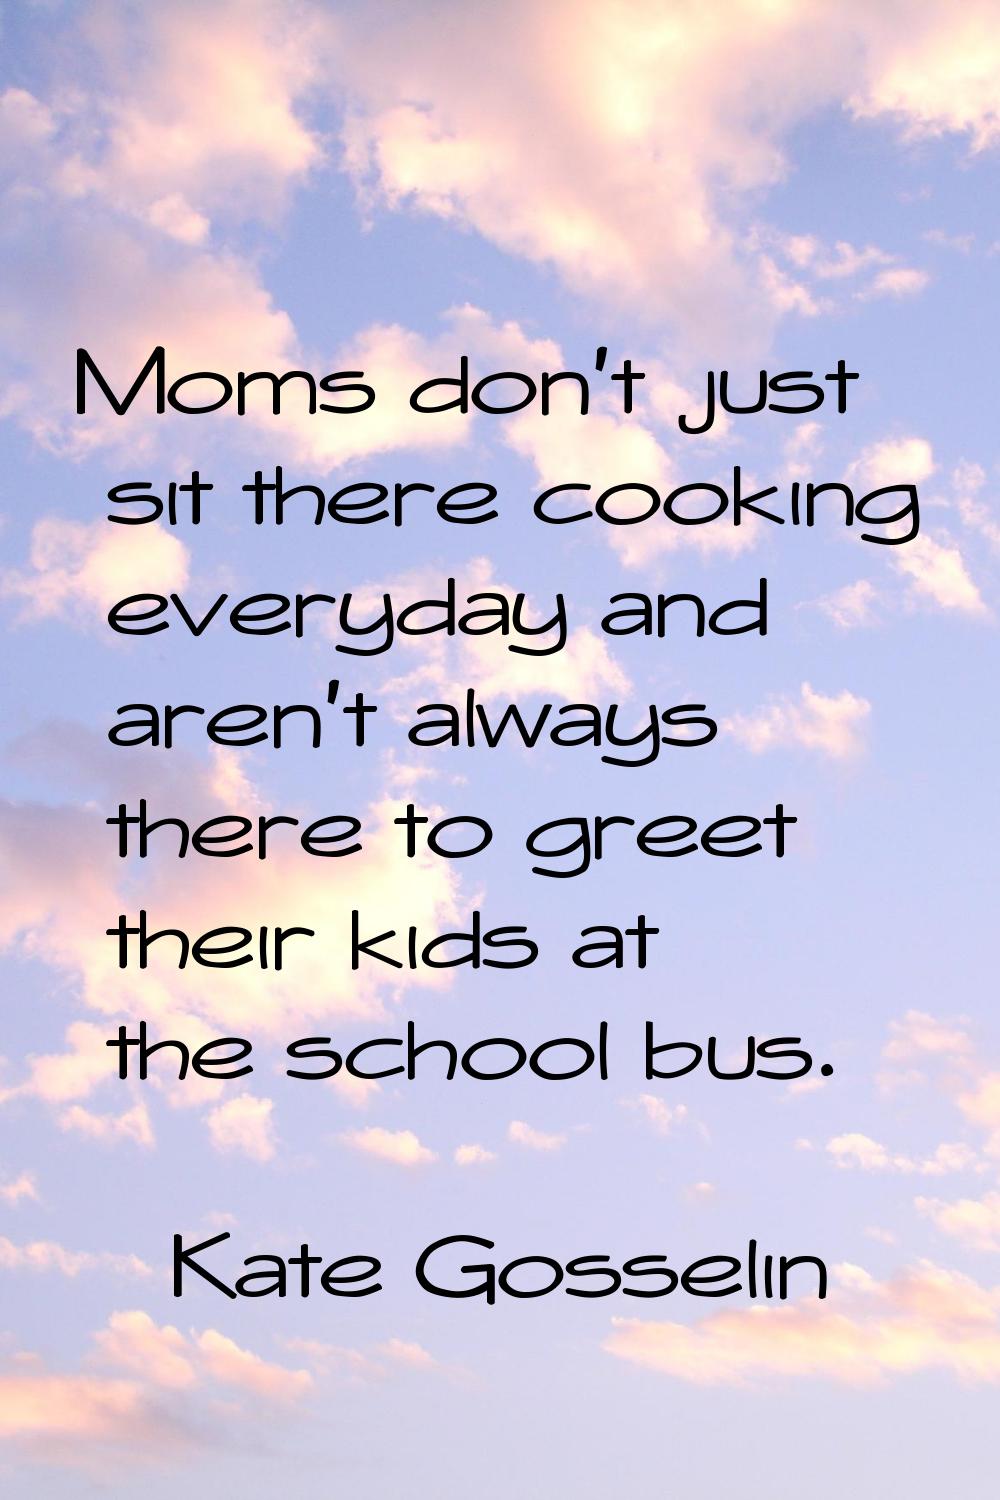 Moms don't just sit there cooking everyday and aren't always there to greet their kids at the schoo